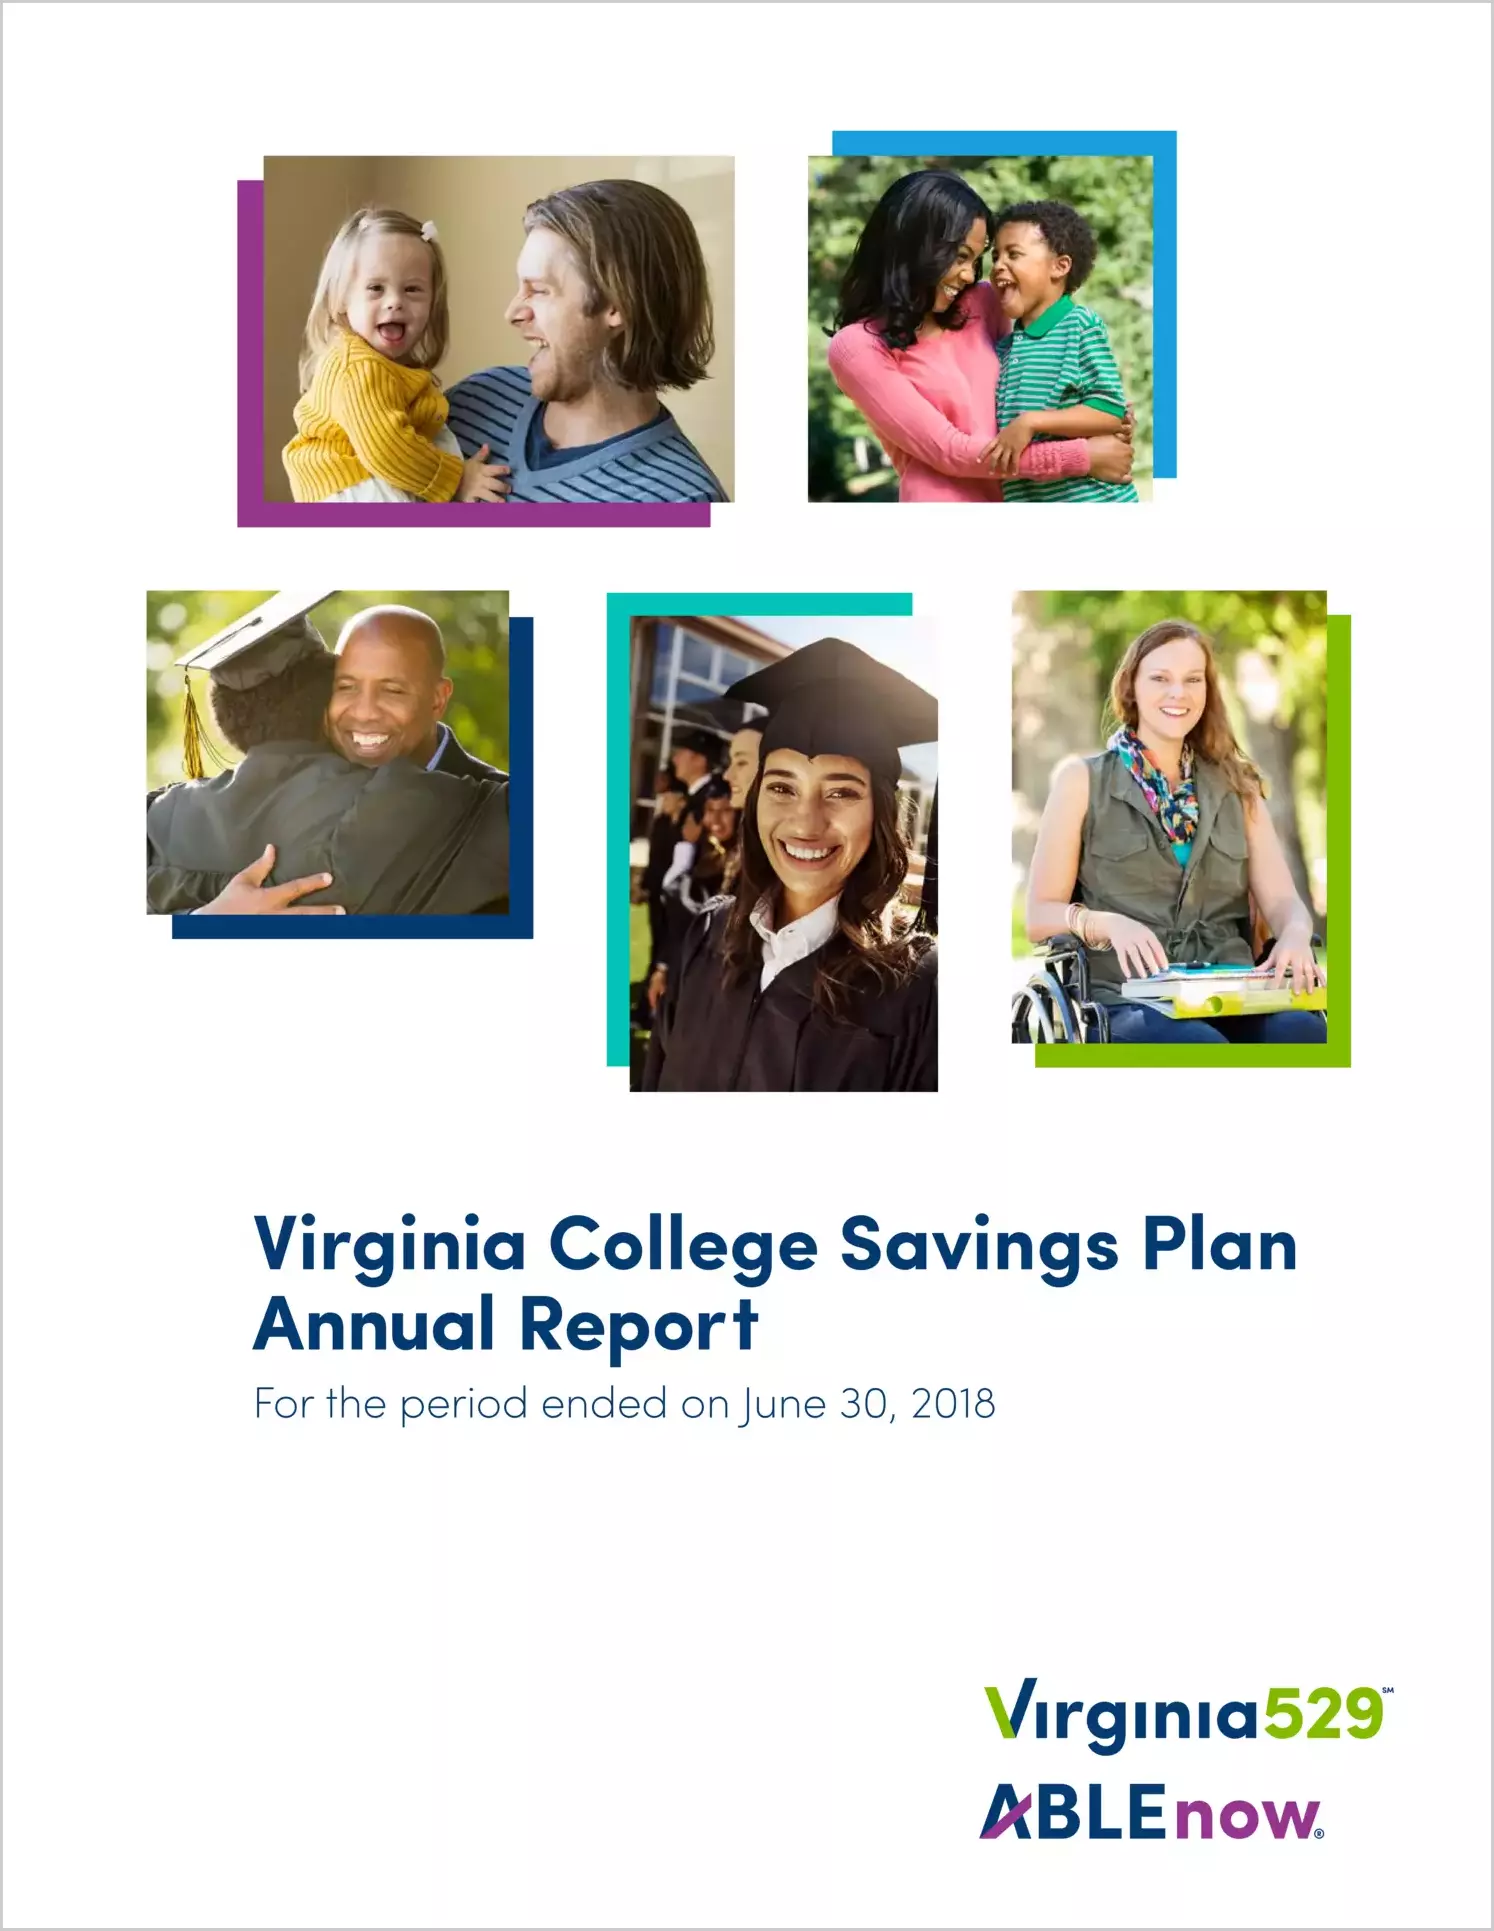 Virginia College Savings Plan Financial Statements & Internal Control Report for the year ended June 30, 2018